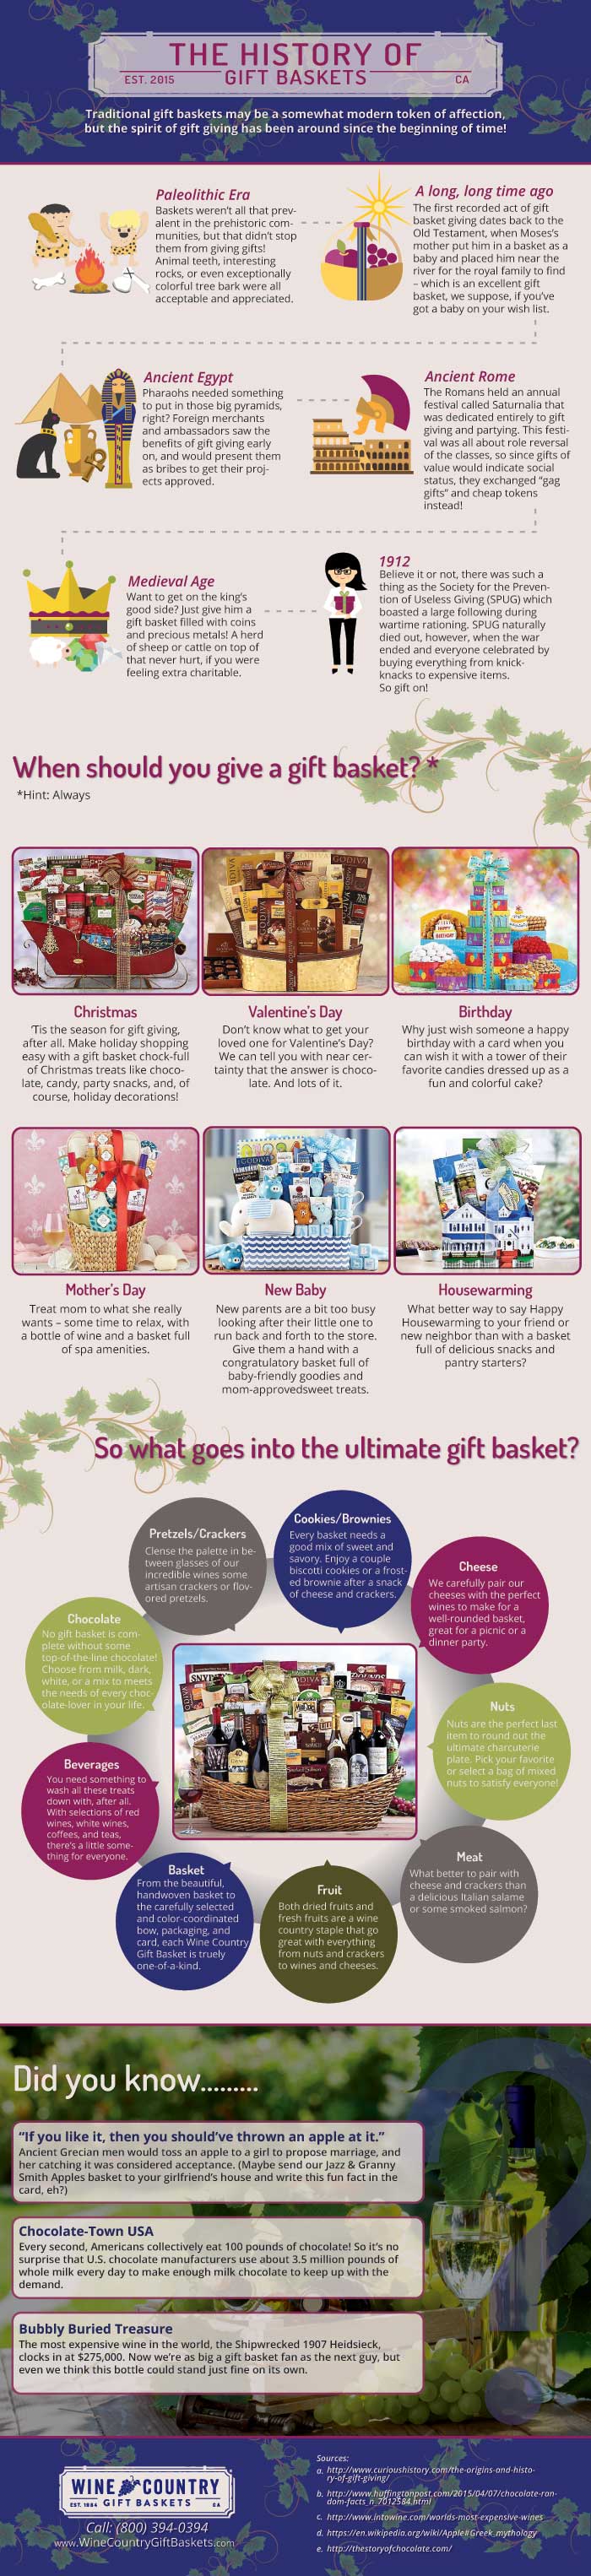 History of Gift Baskets